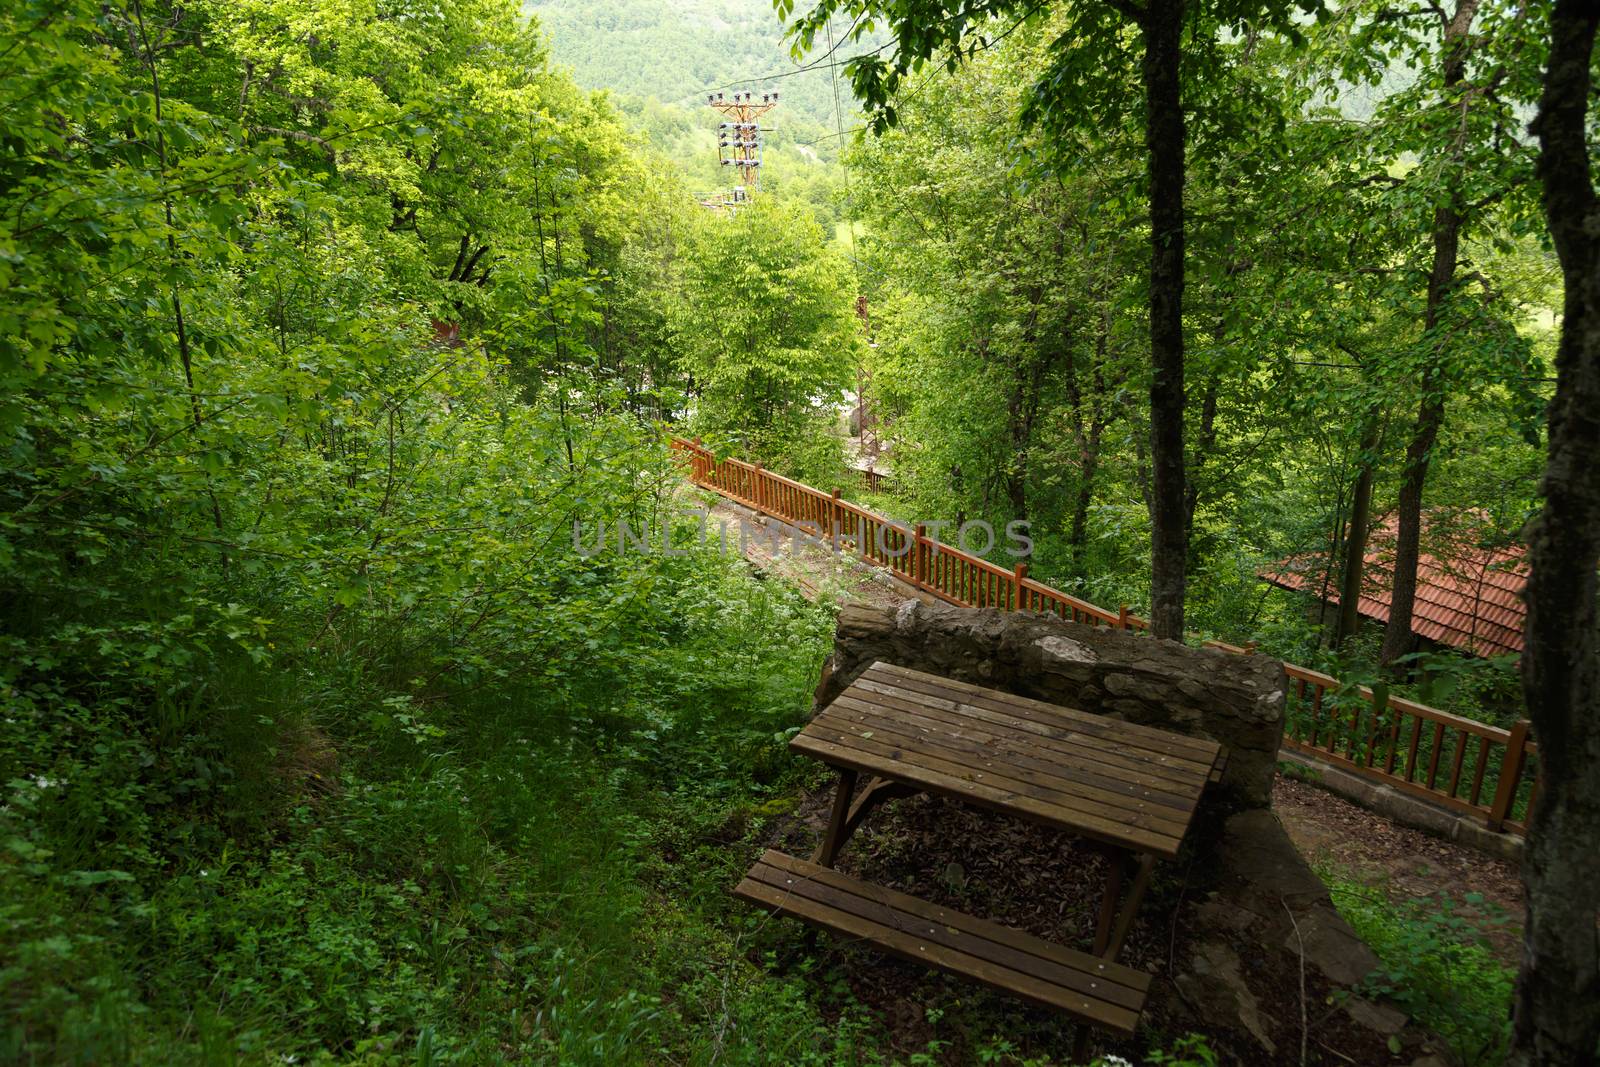 Landscape view of intense Black Sea forests with green trees, meadow area, and wooden table.